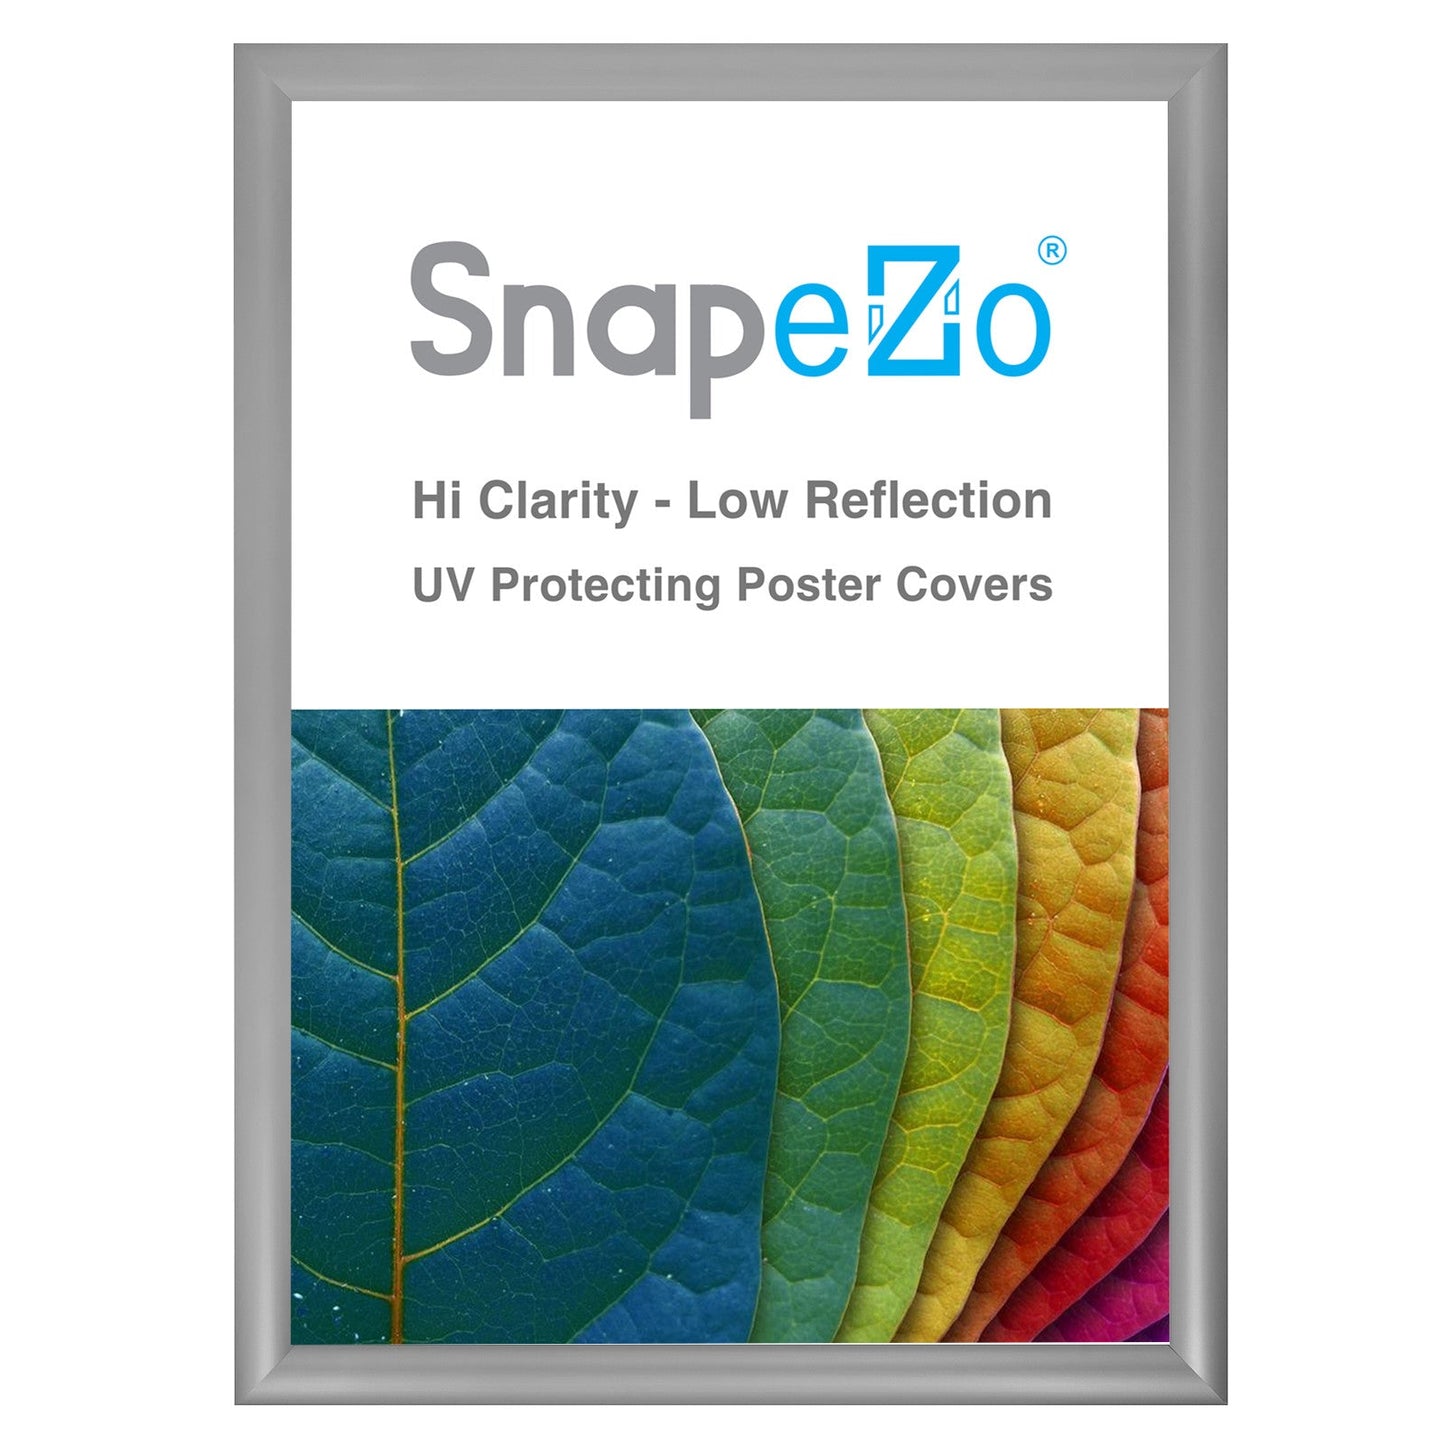 Load image into Gallery viewer, 19x27 Silver SnapeZo® Snap Frame - 1.2&amp;quot; Profile
